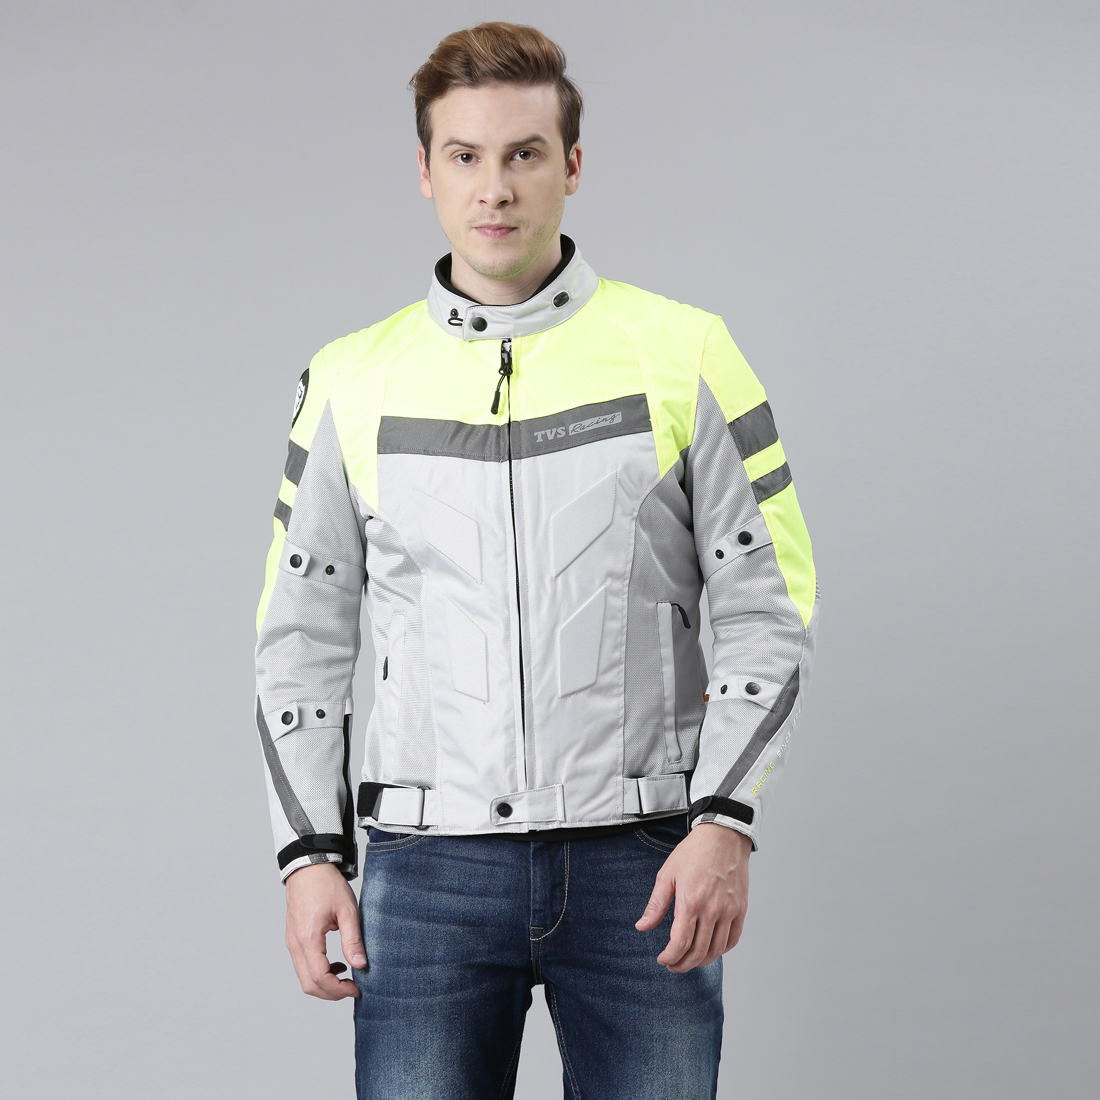 TVS Racing Aegis 3-Layer Riding Jacket for Men- All Weather Adaptability, CE Level 2 Armour Protection